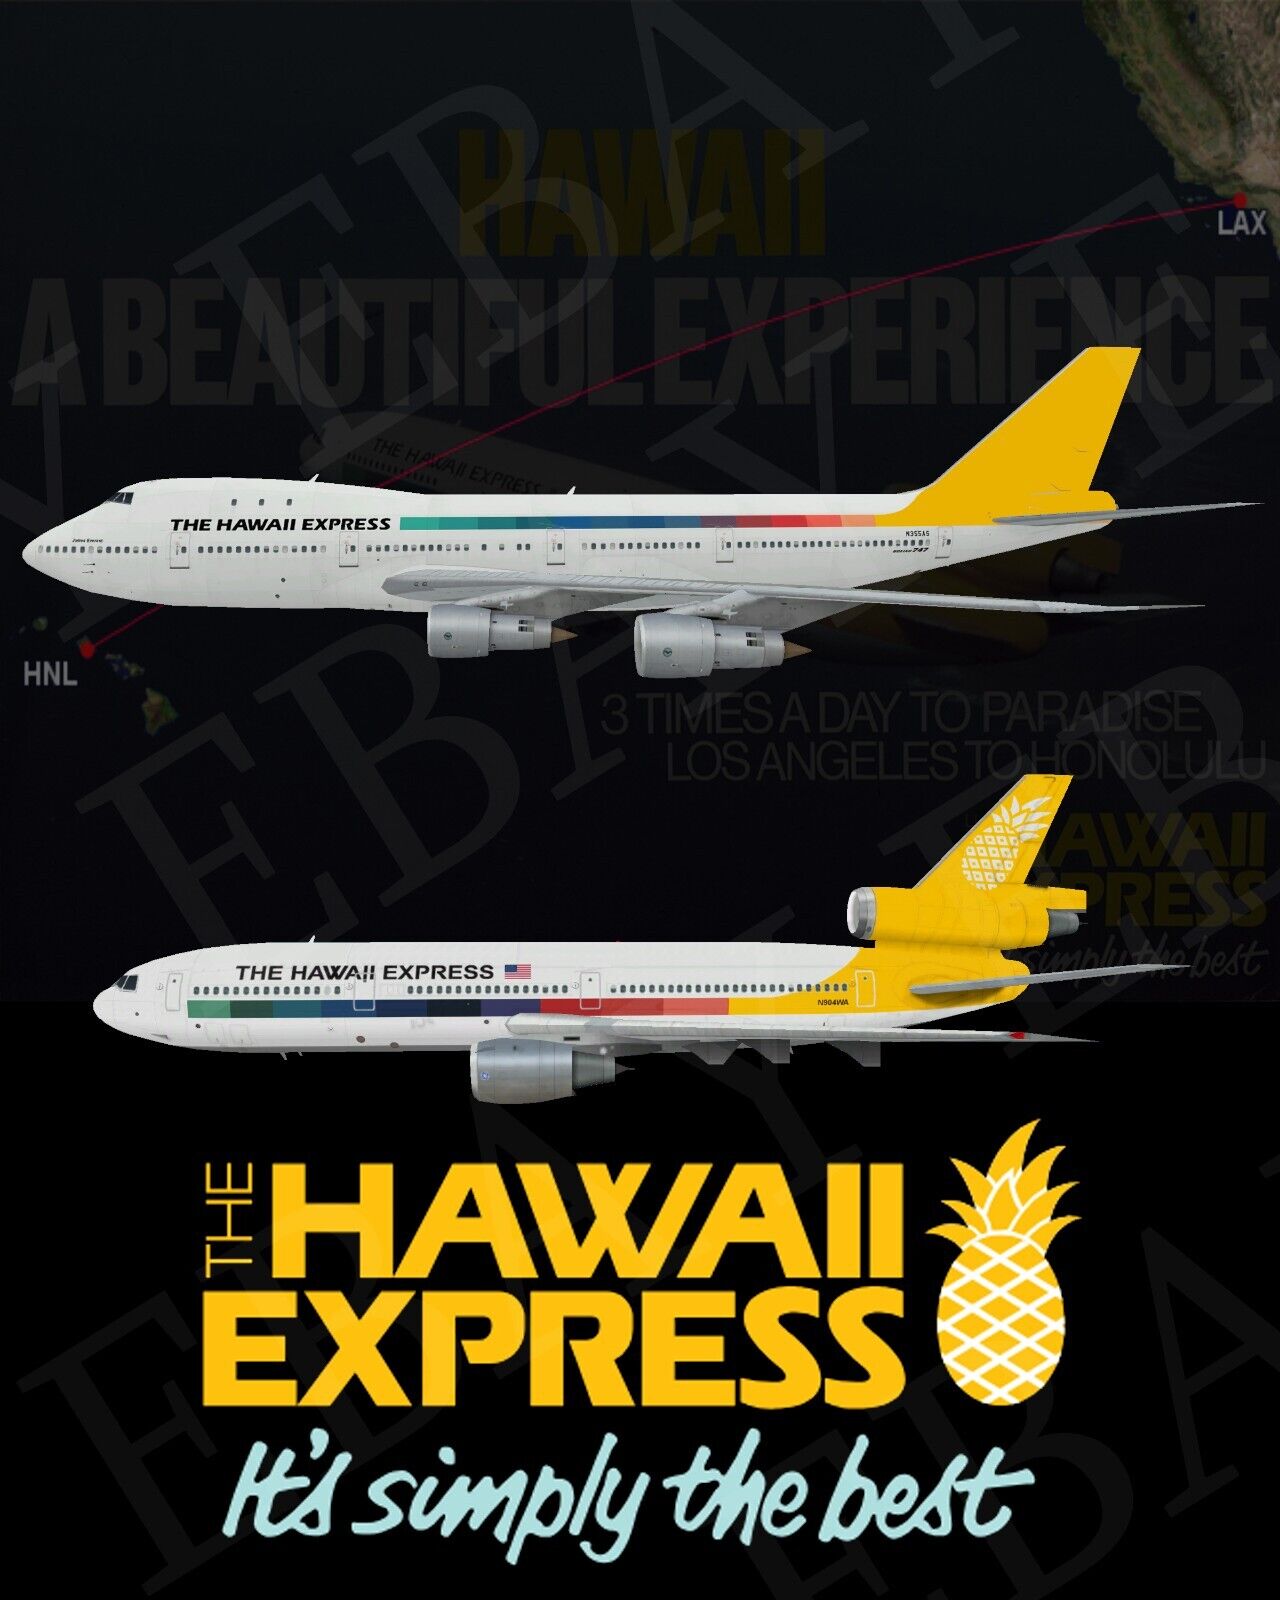 The Hawaii Express Airlines 747 DC-10 Retro 8 X 10